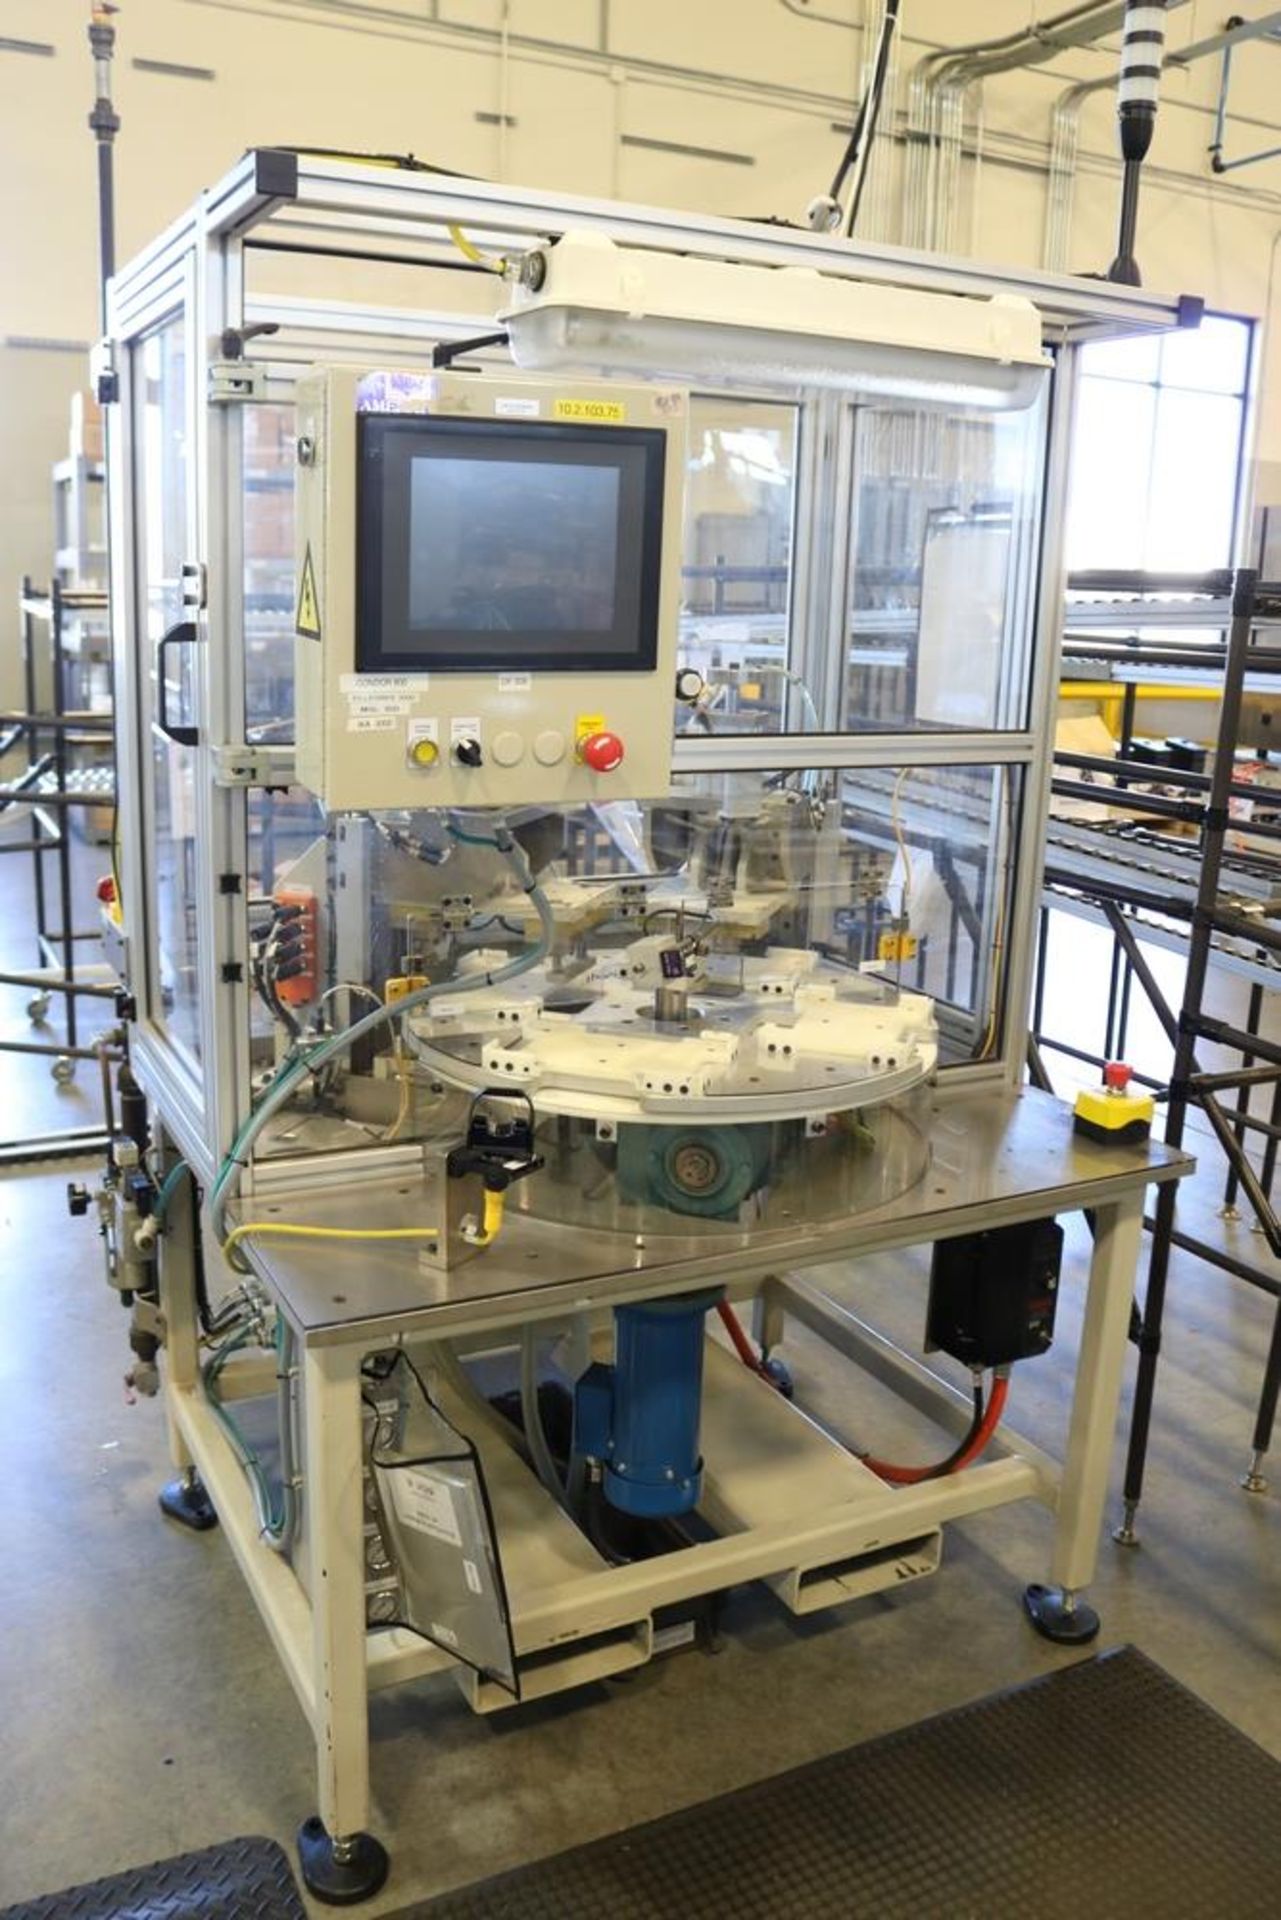 3 Station Automated Module Assembly Line Built by Pro Tech Machine for Enerdel Module Assembly - Image 3 of 48